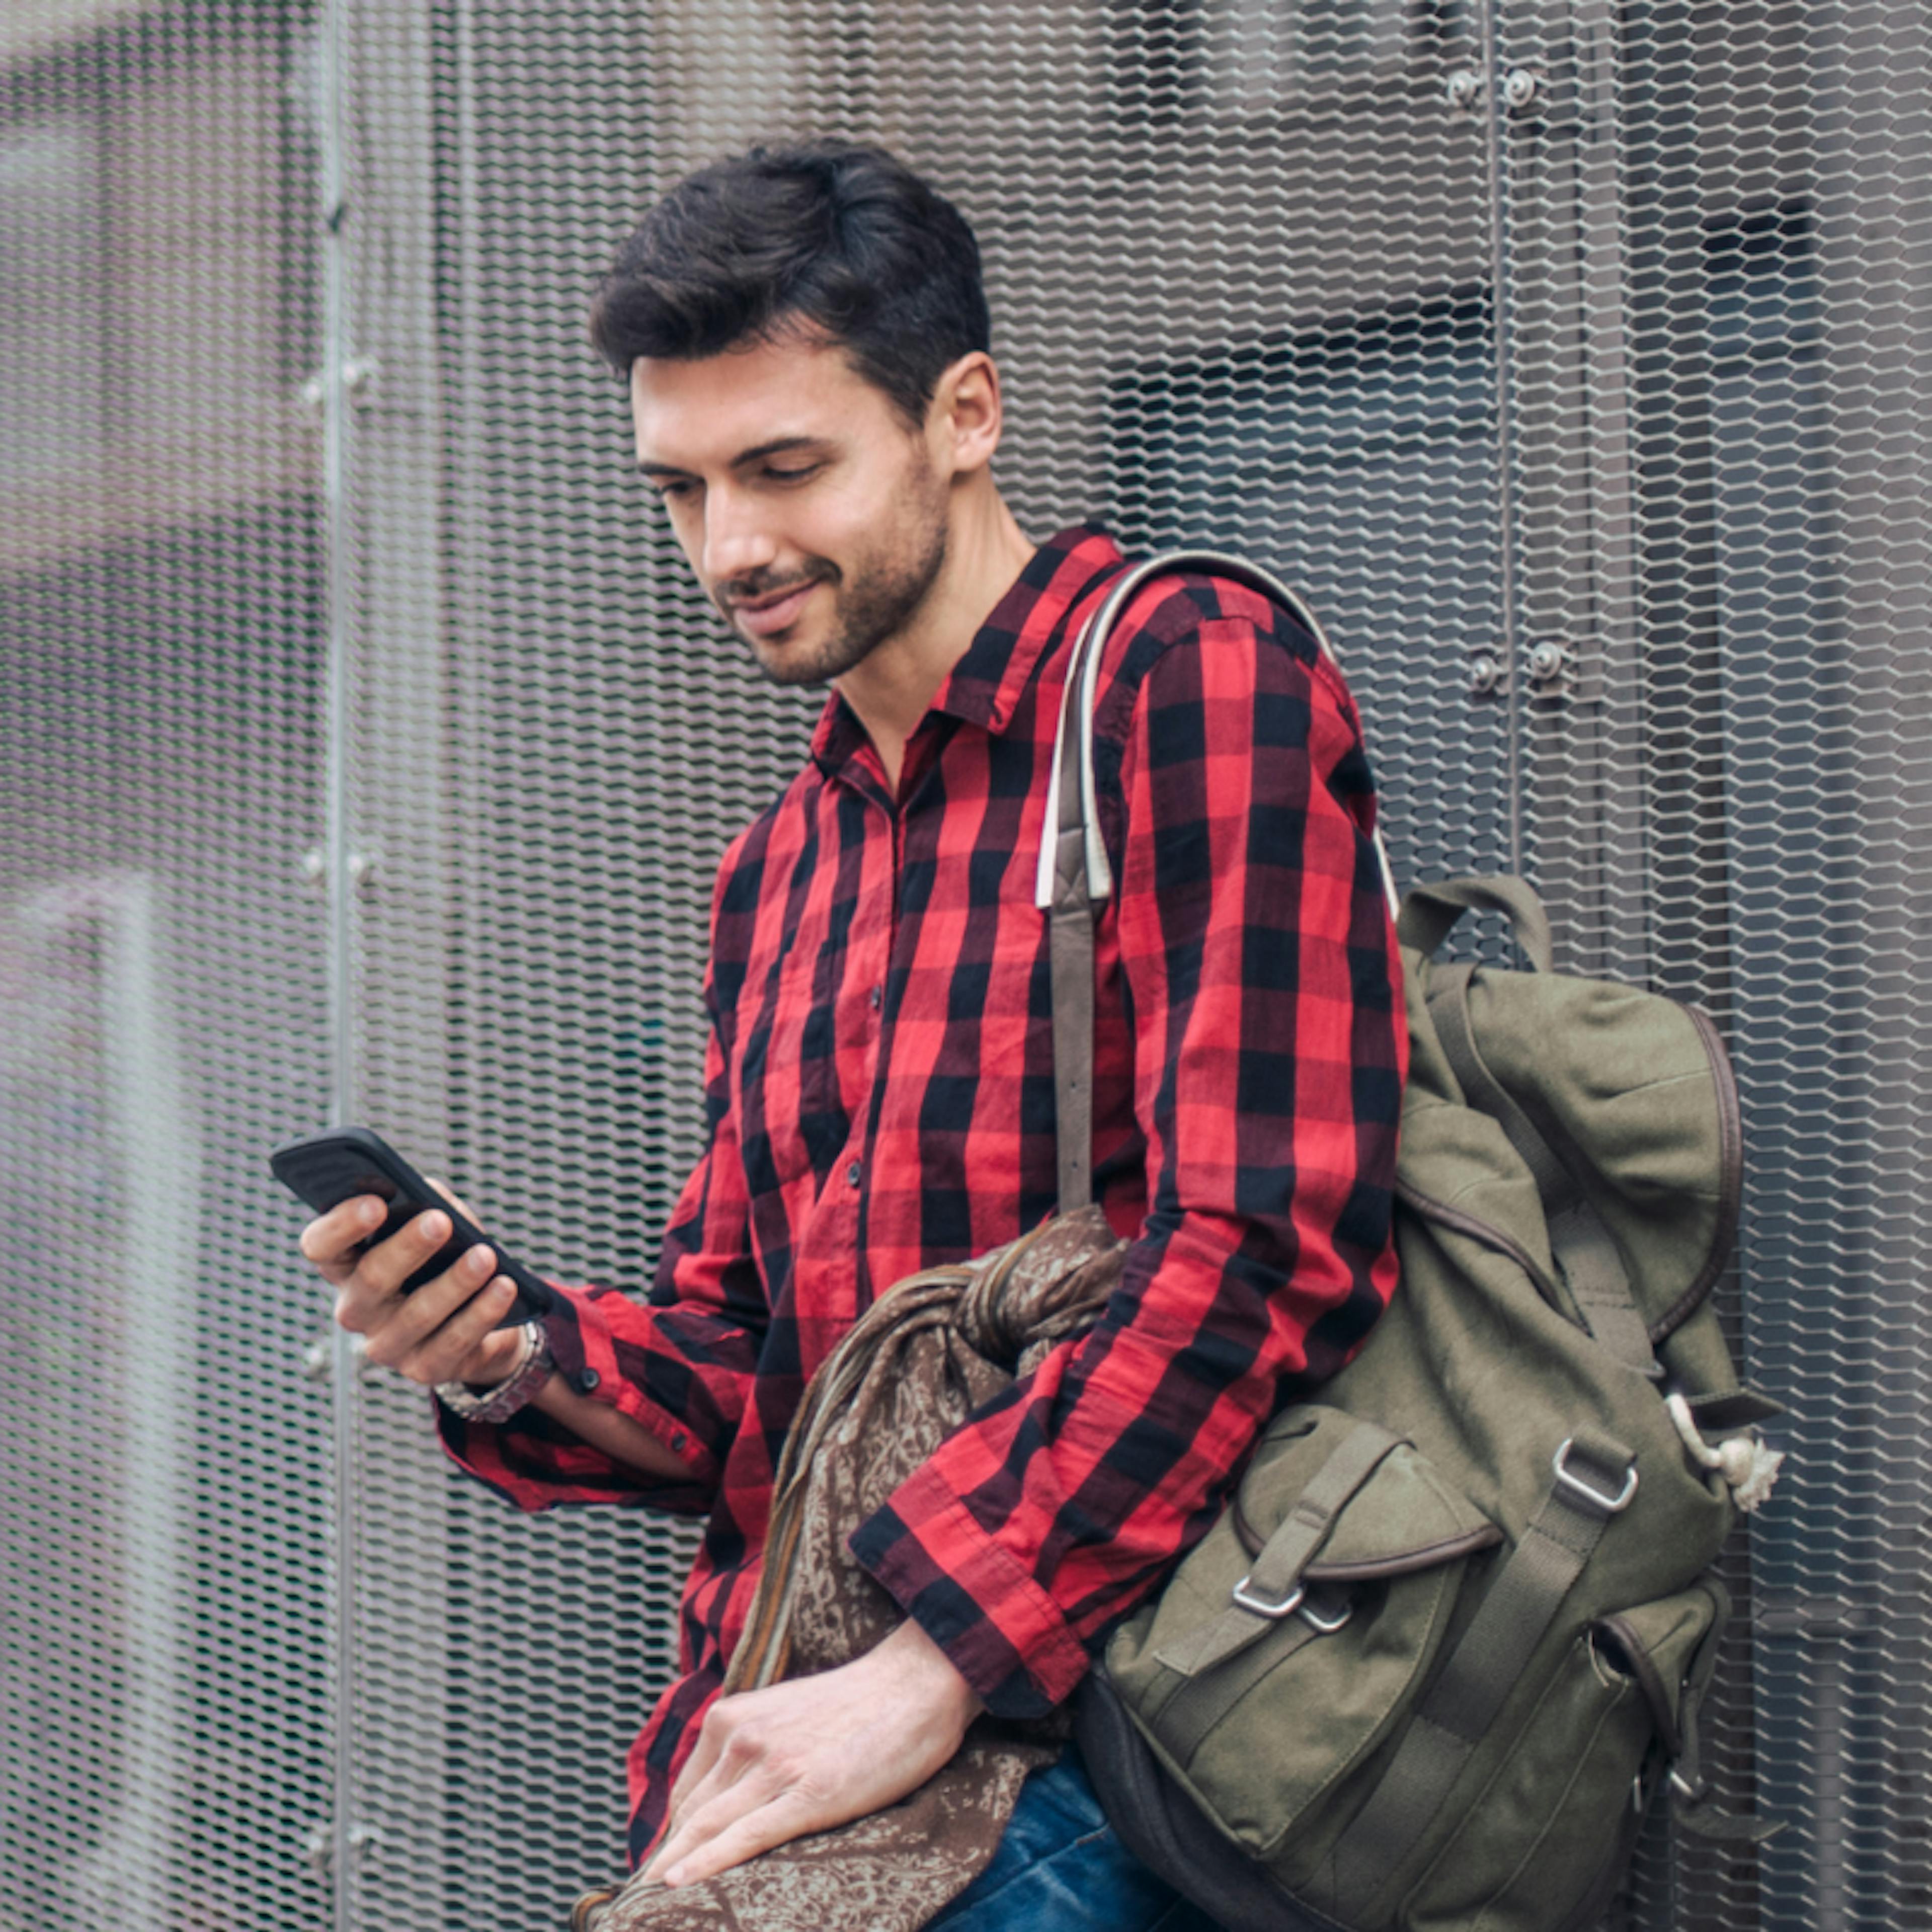 Young man in checked shirt looking at phone